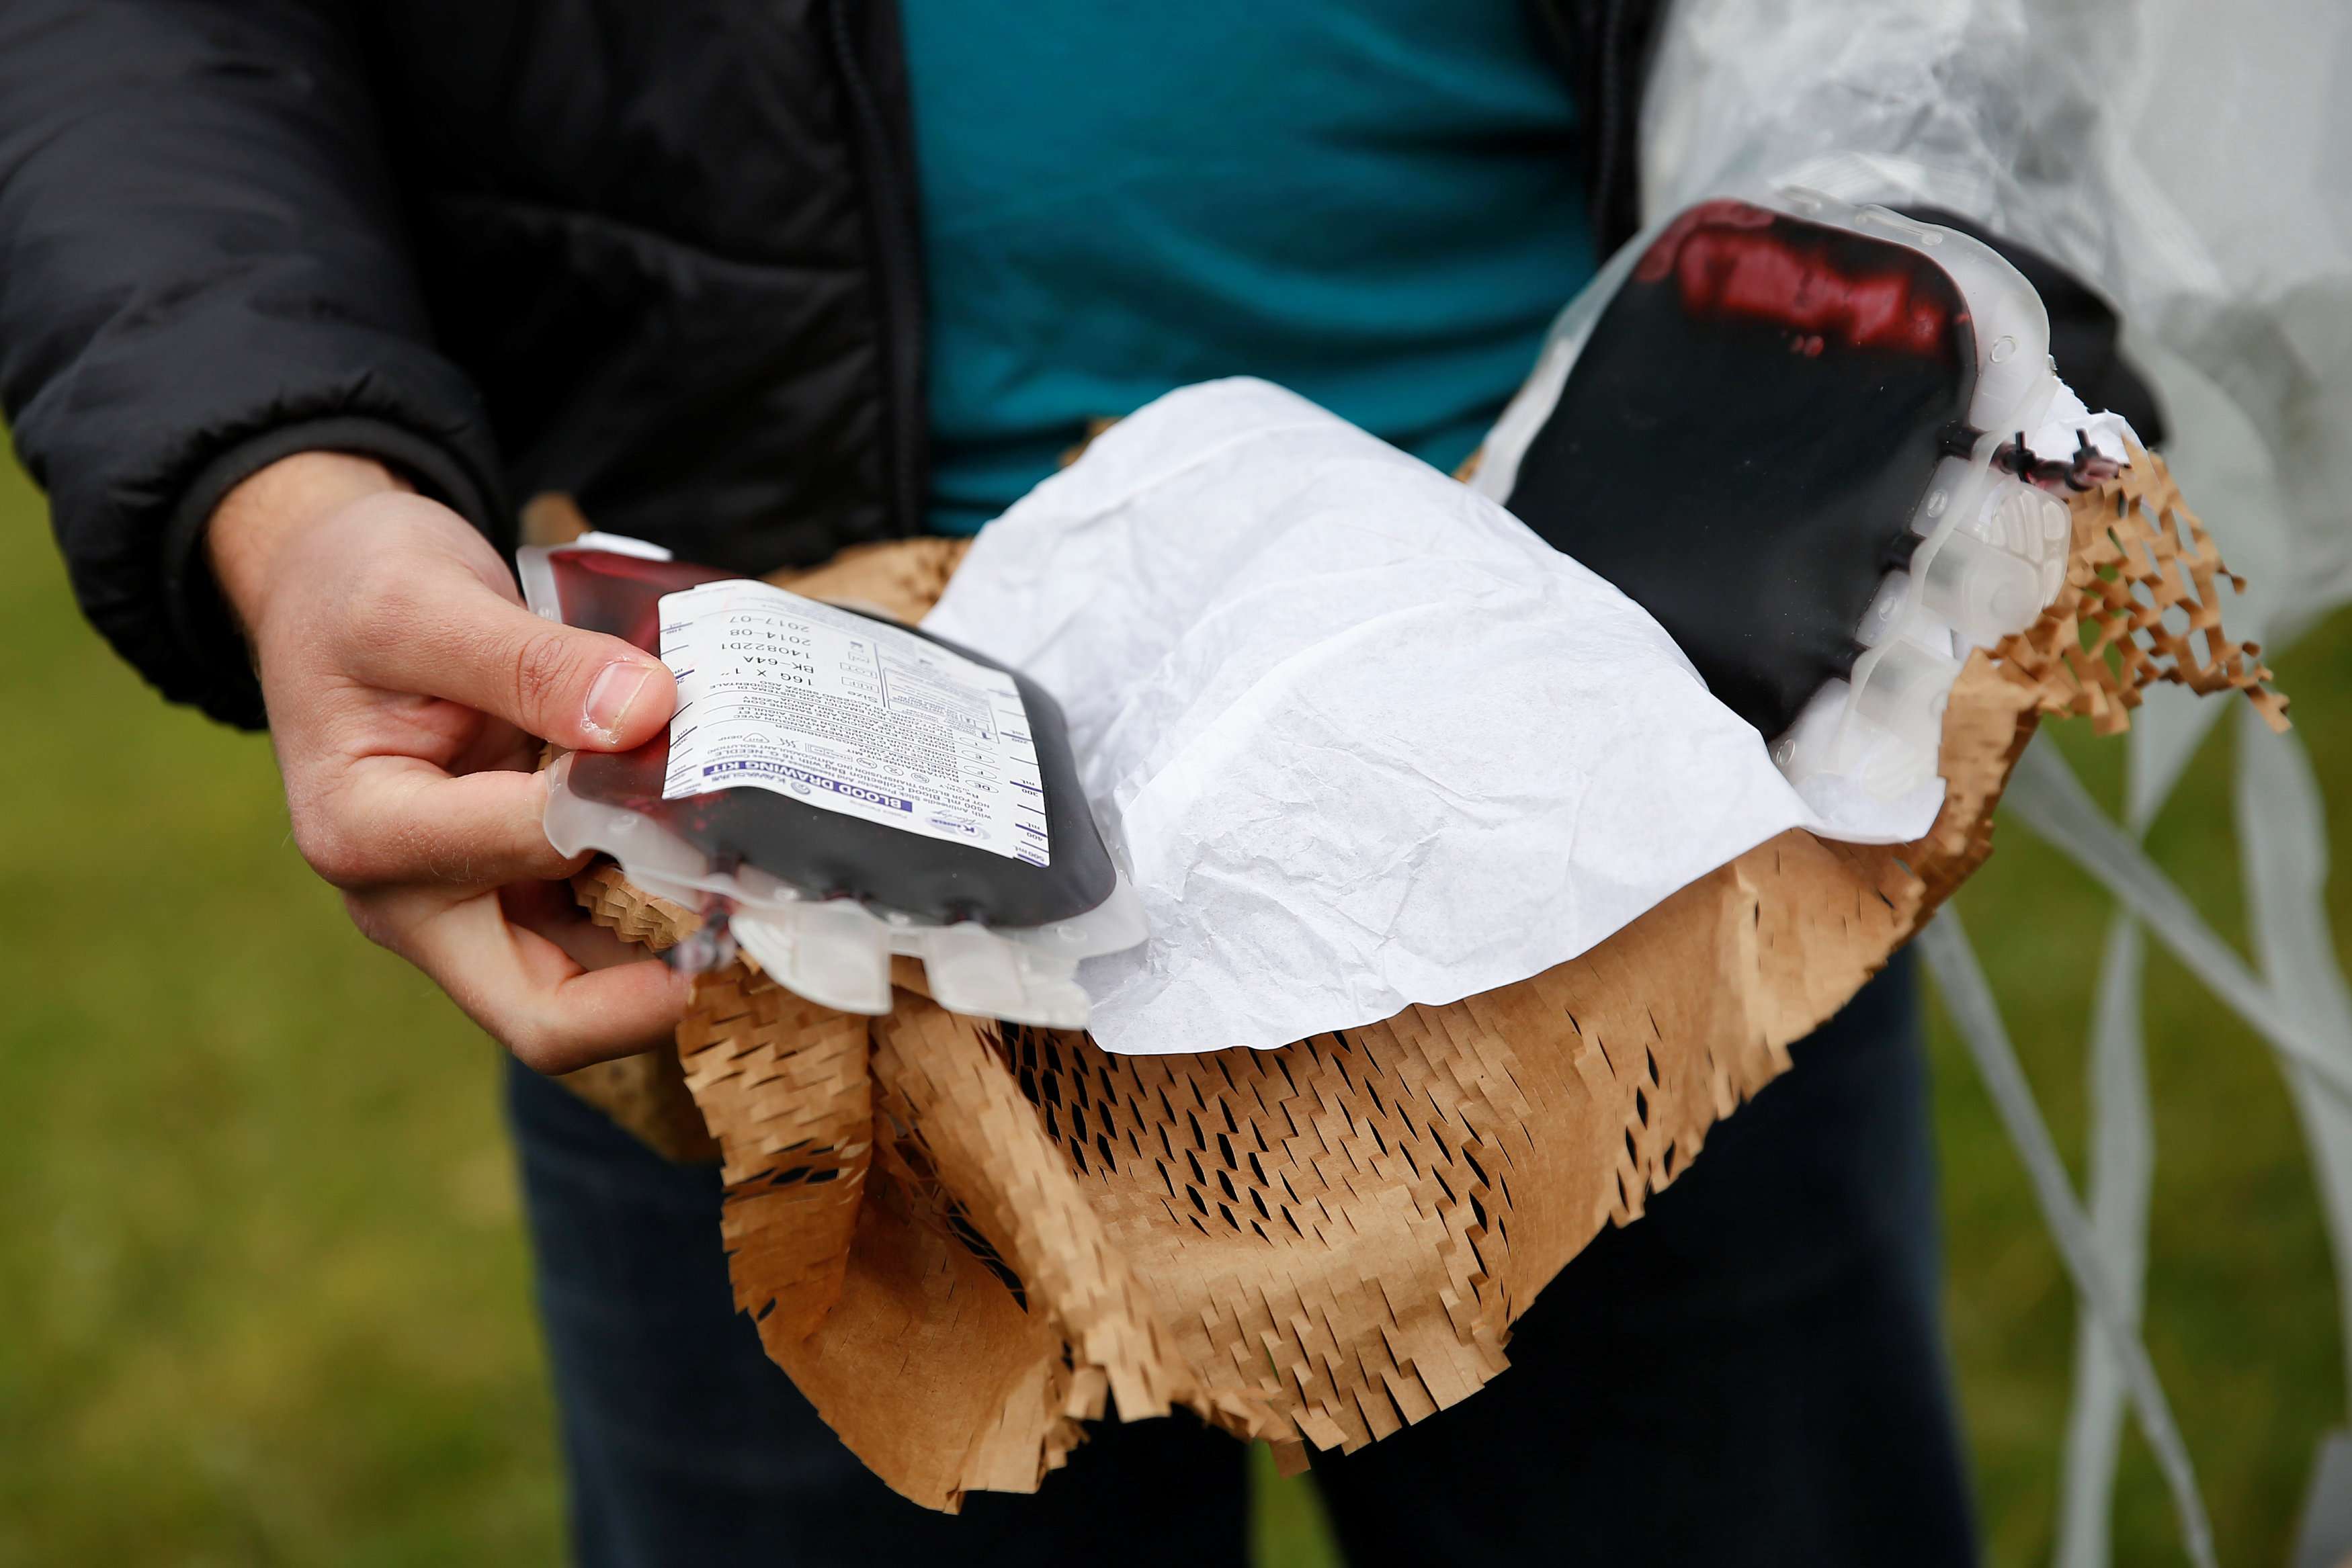 A Zipline employee displays a package of fake blood airdropped by one of its drones during a flight demonstration in the San Francisco Bay Area, California. This summer, the company will start delivering blood to hospitals and health centres in Rwanda. Photo: Reuters